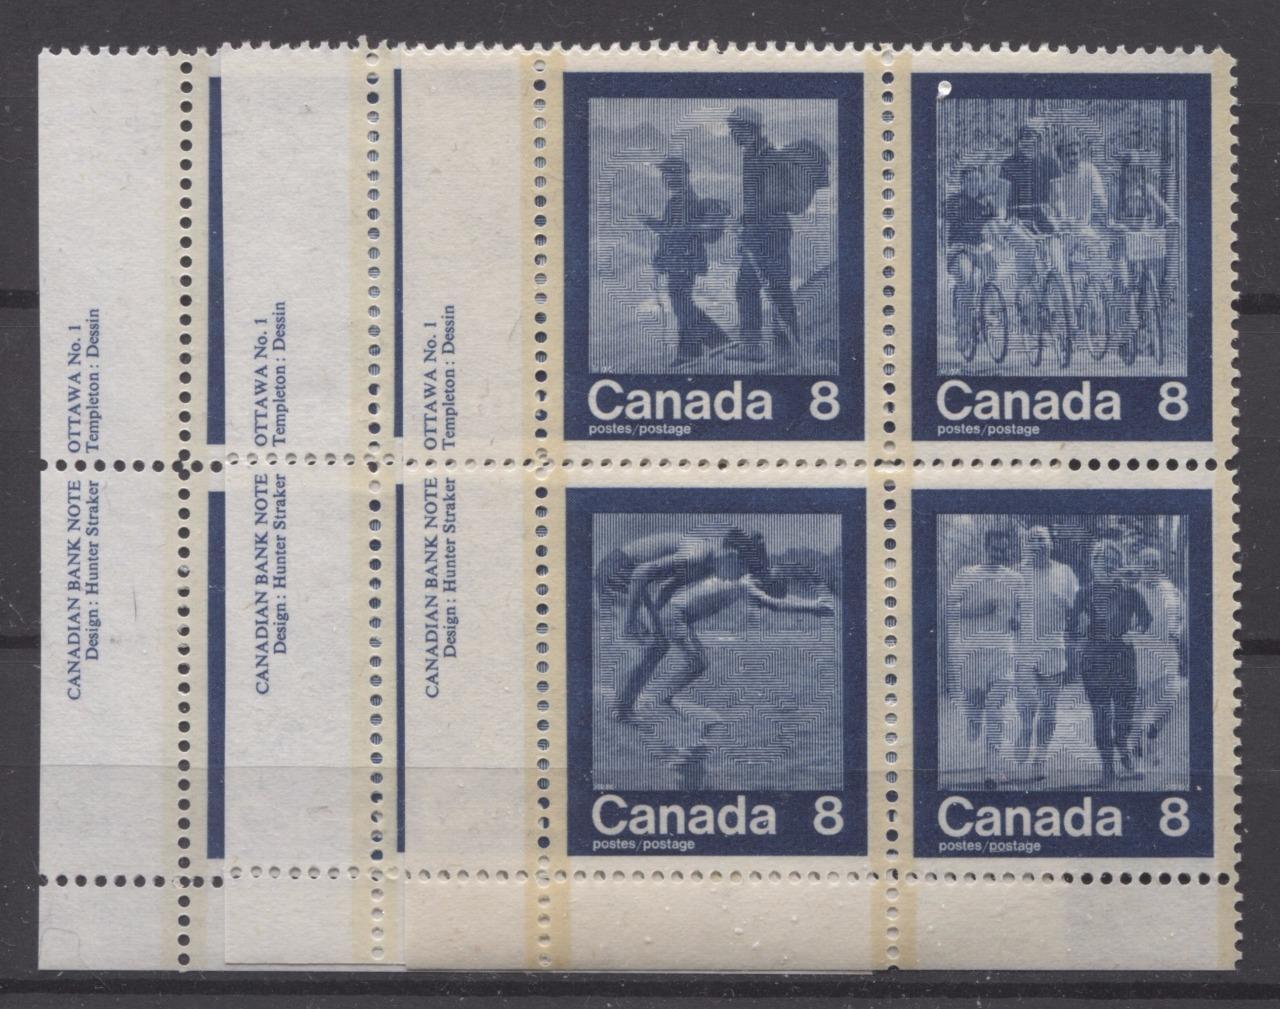 Canada #632a (SG#768a) 1974 Summer Sports Issue Block of 4 Paper/Tag Type 4 Plate 1 UR VF-84 NH Brixton Chrome 